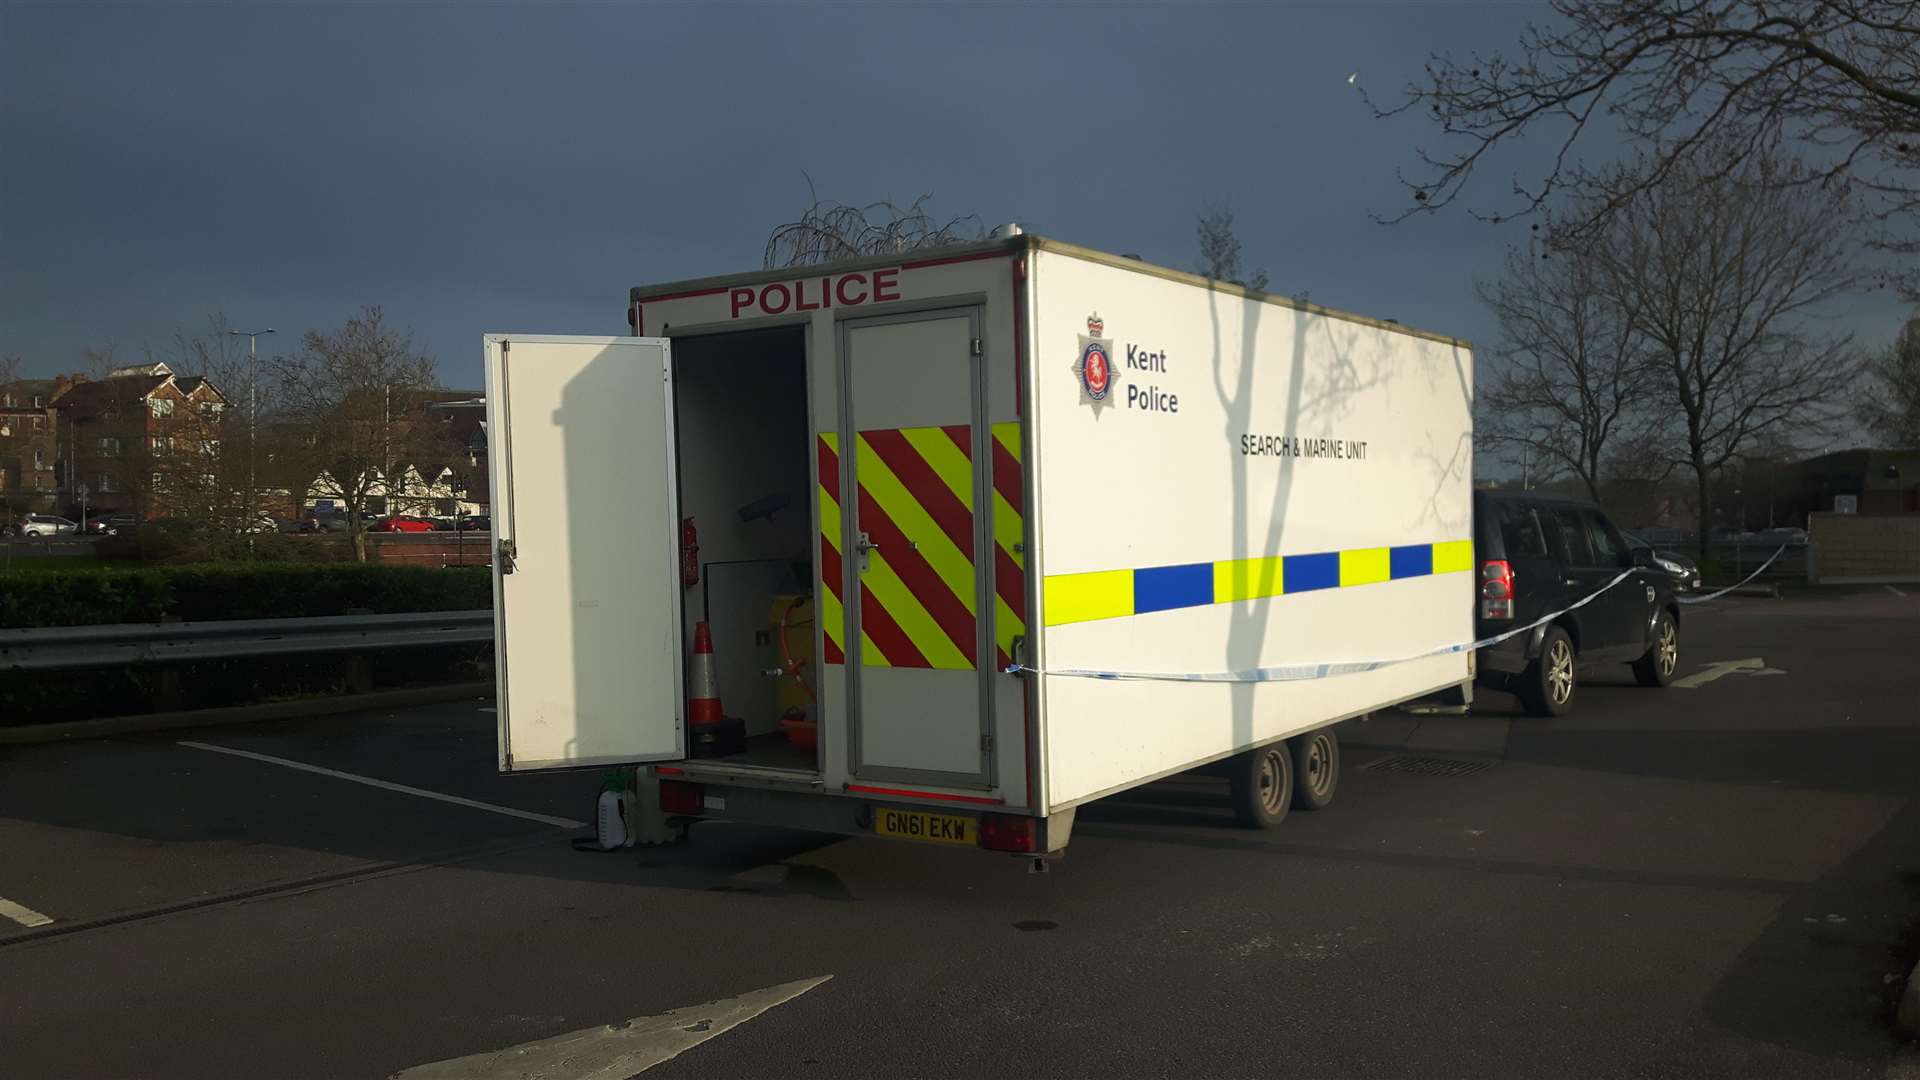 A special police marine unit has been attending